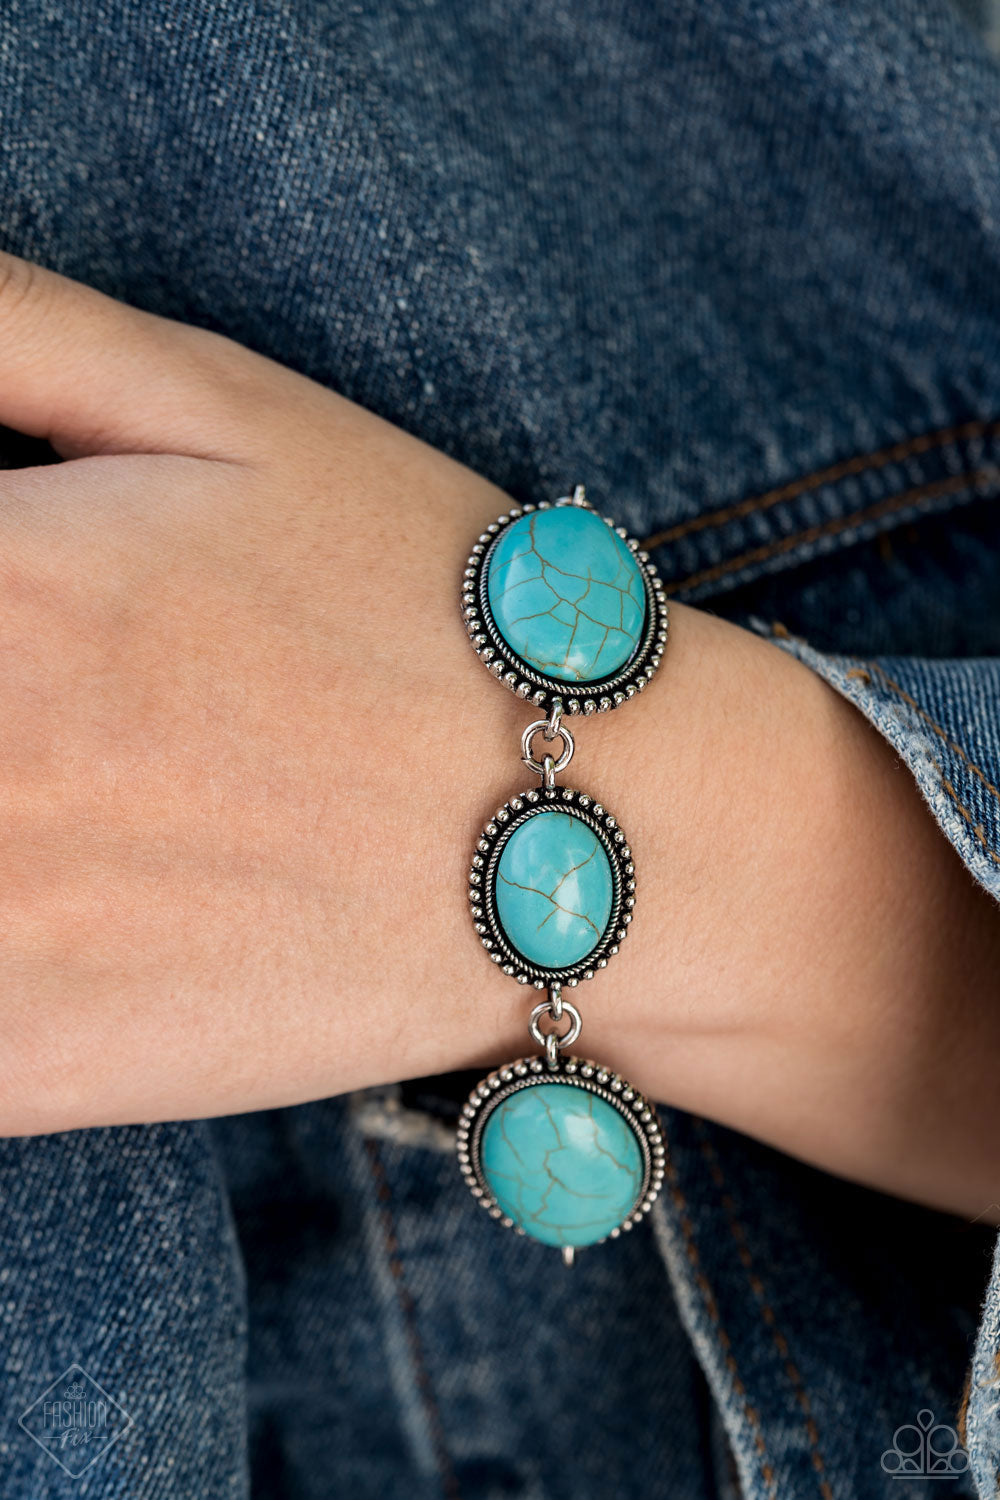 SIMPLY SANTA FE - DECEMBER 2020 BLUE TURQUOISE OVALS